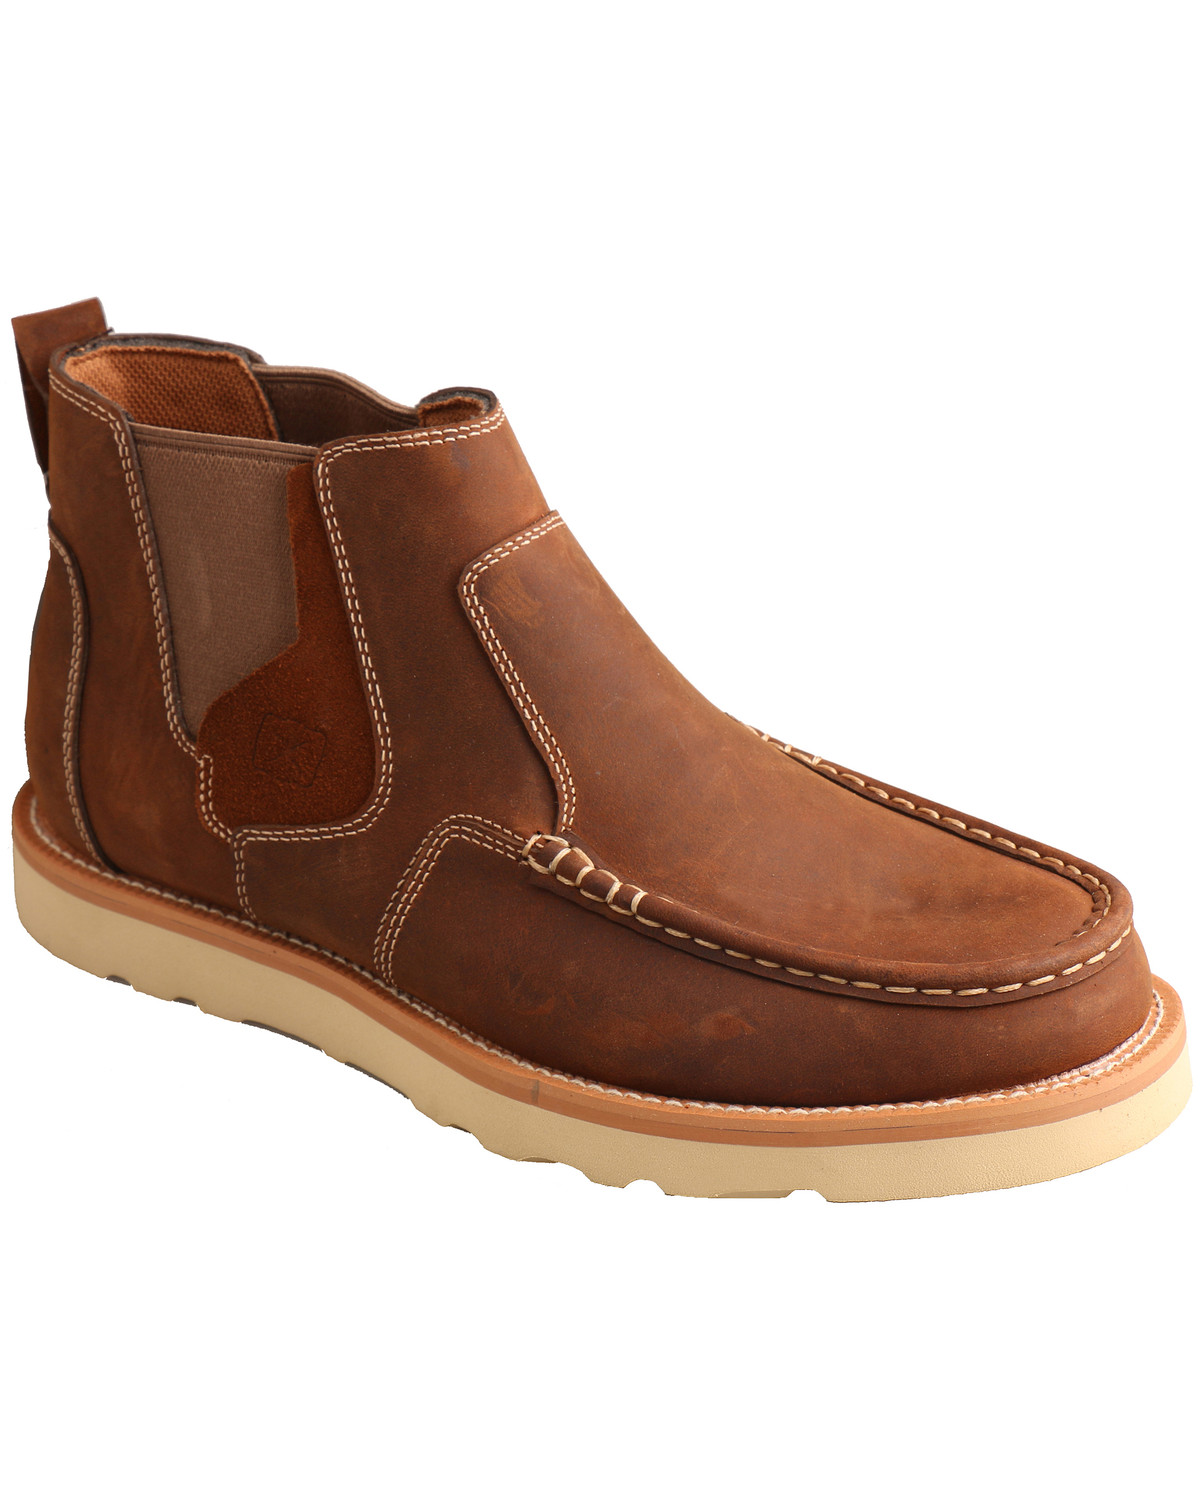 men's pull on casual boots